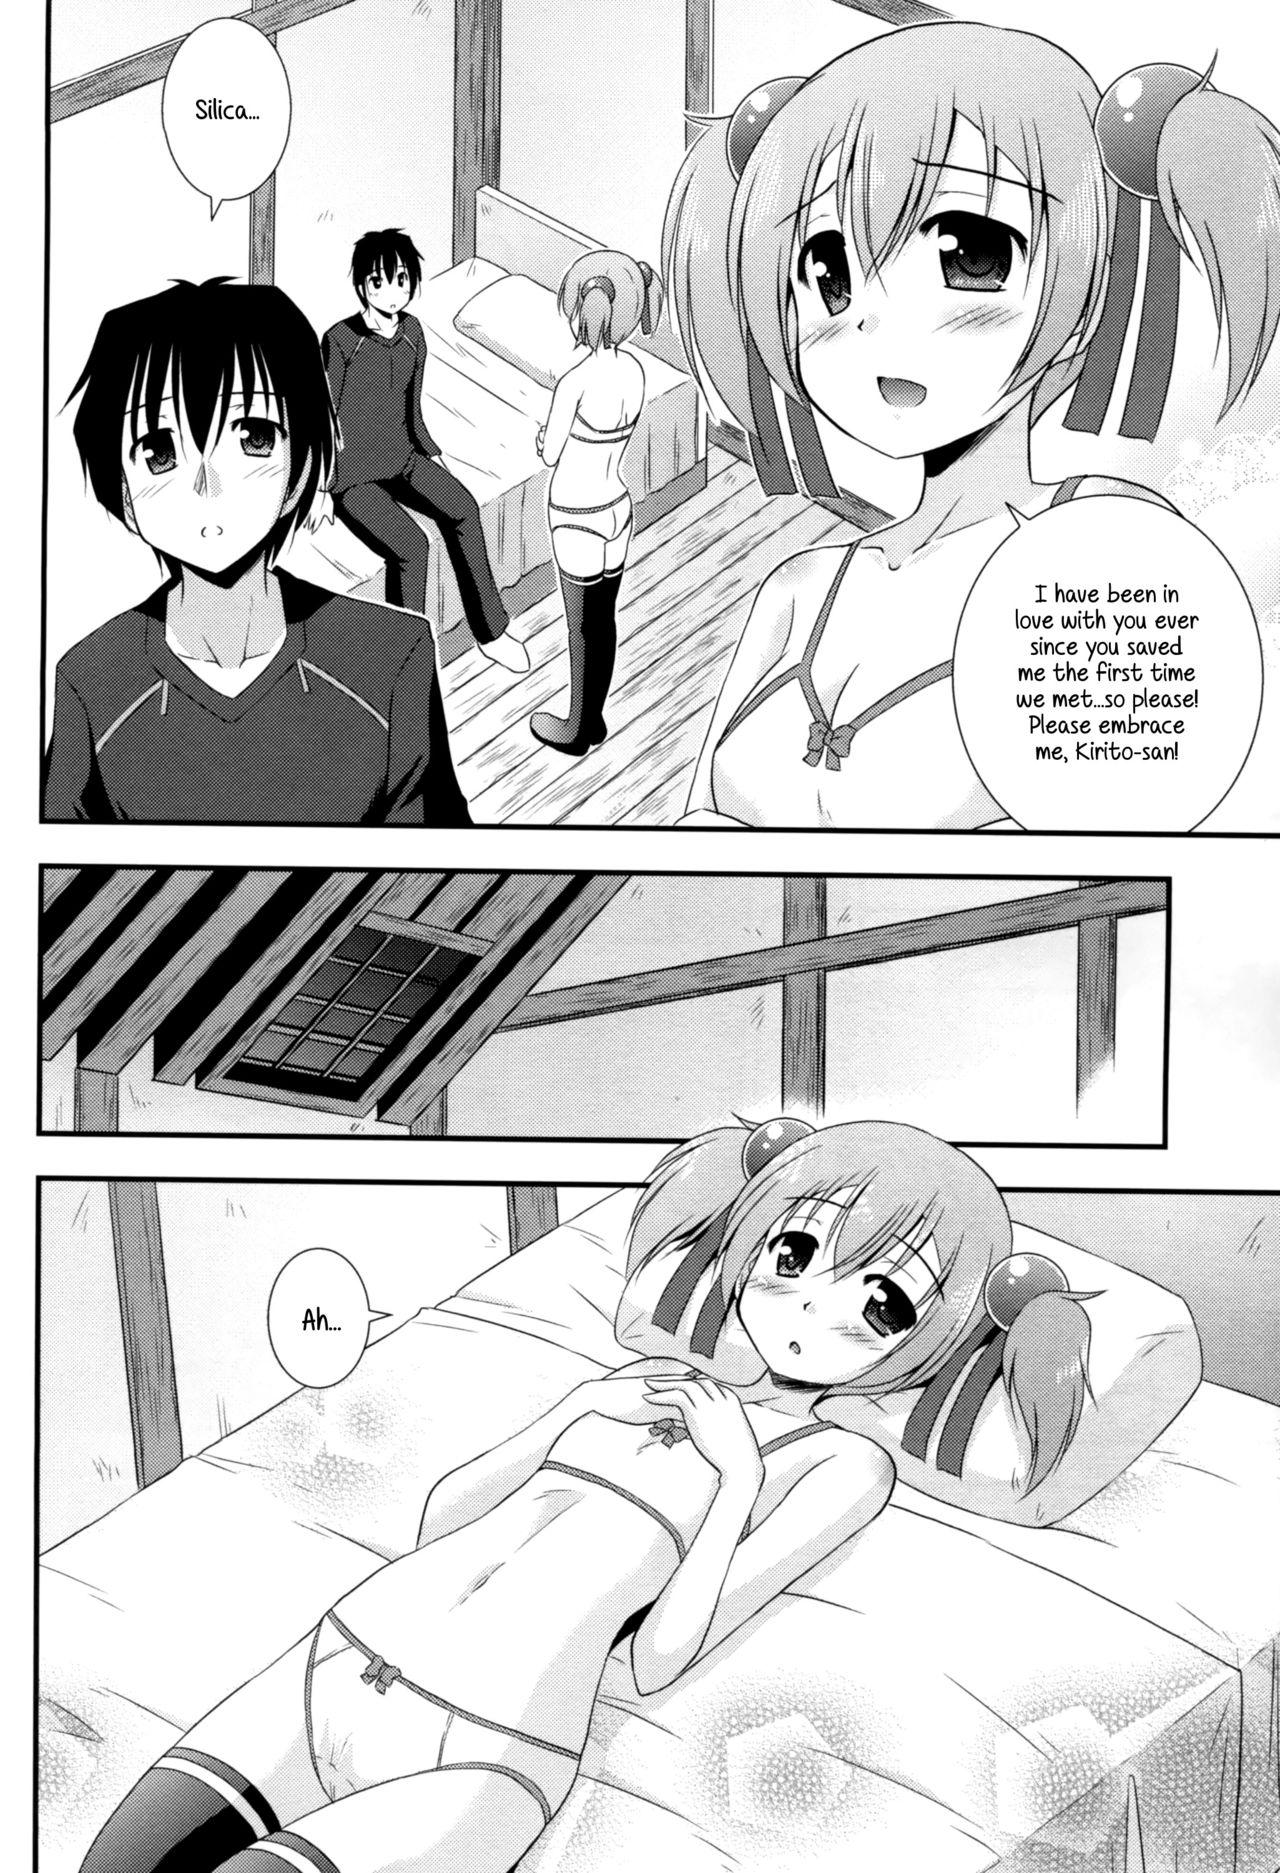 Girlongirl Silica Route Online - Sword art online Grandmother - Page 13